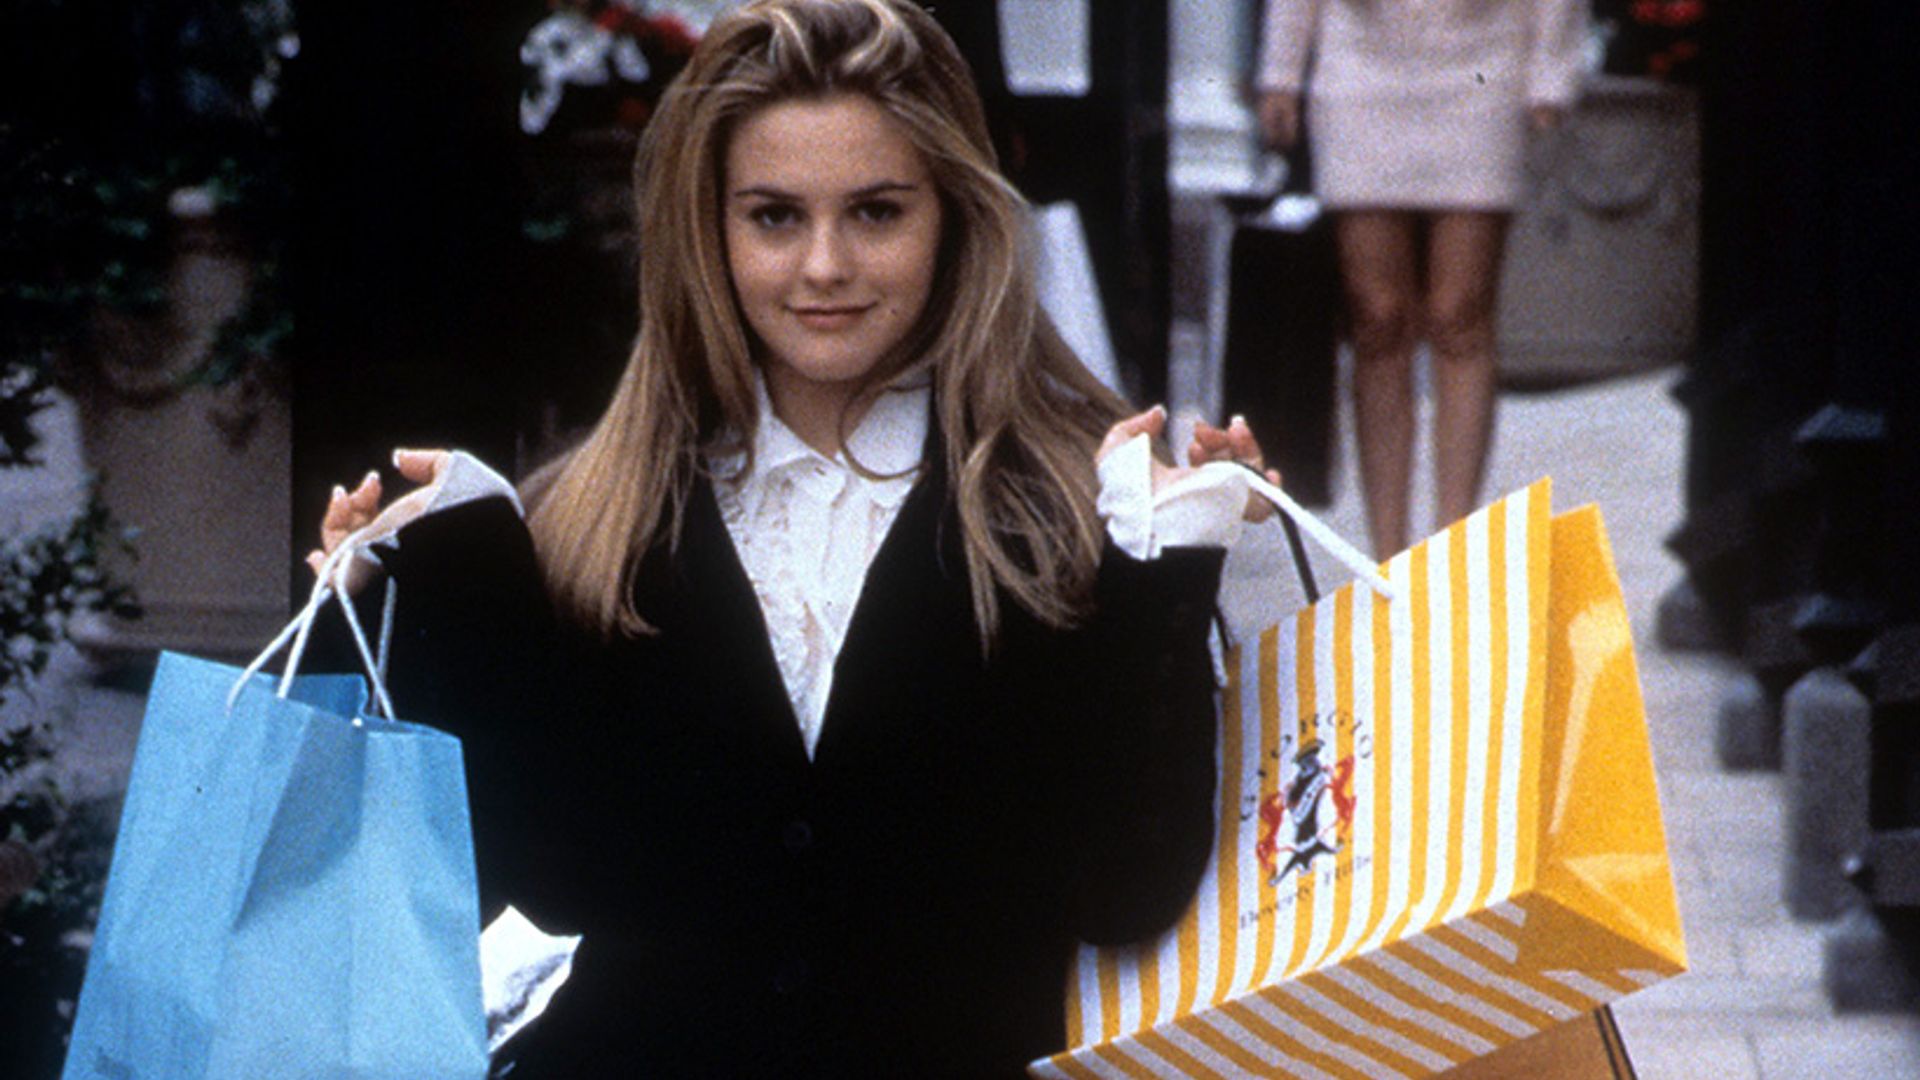 Remember when Cher from Clueless wore THAT yellow co-ord? Topshop has  recreated it and it's amazing | HELLO!